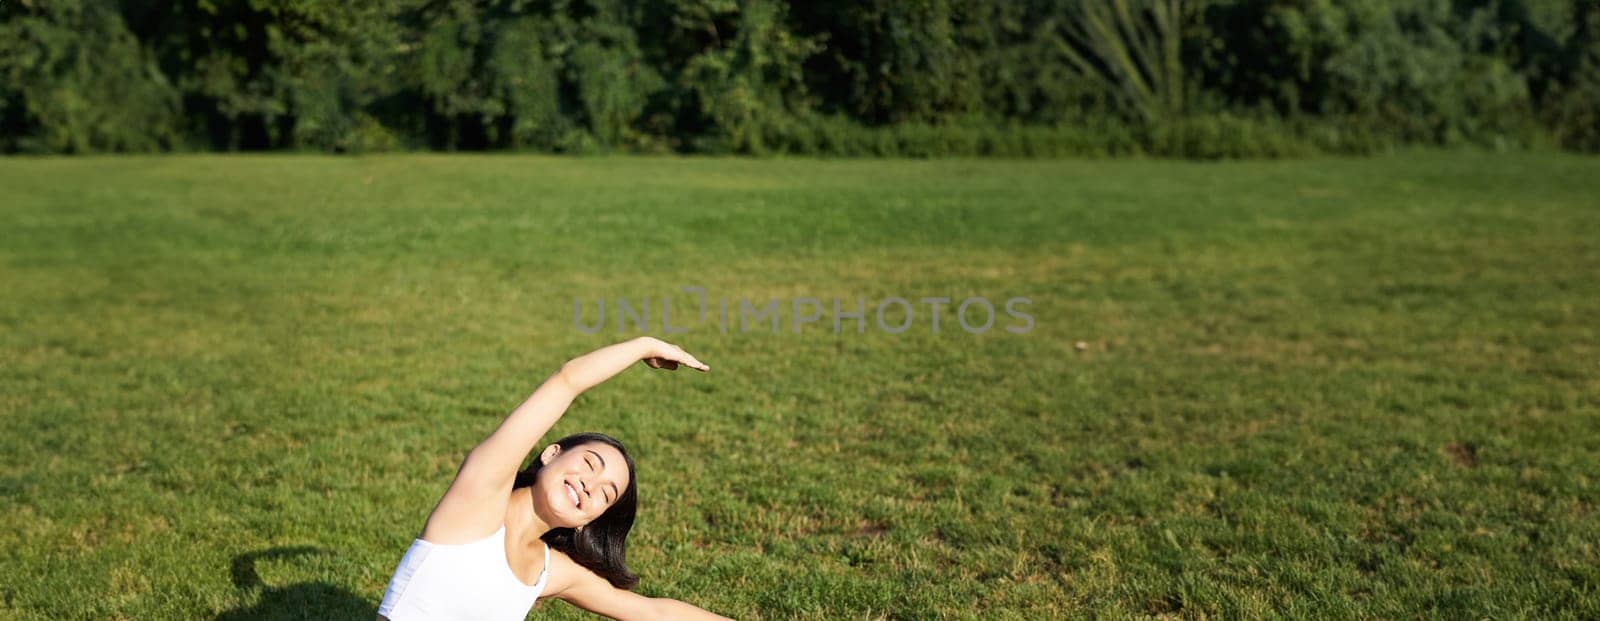 Young woman does yoga on lawn in park, stretching on fitness mat, wellbeing concept.